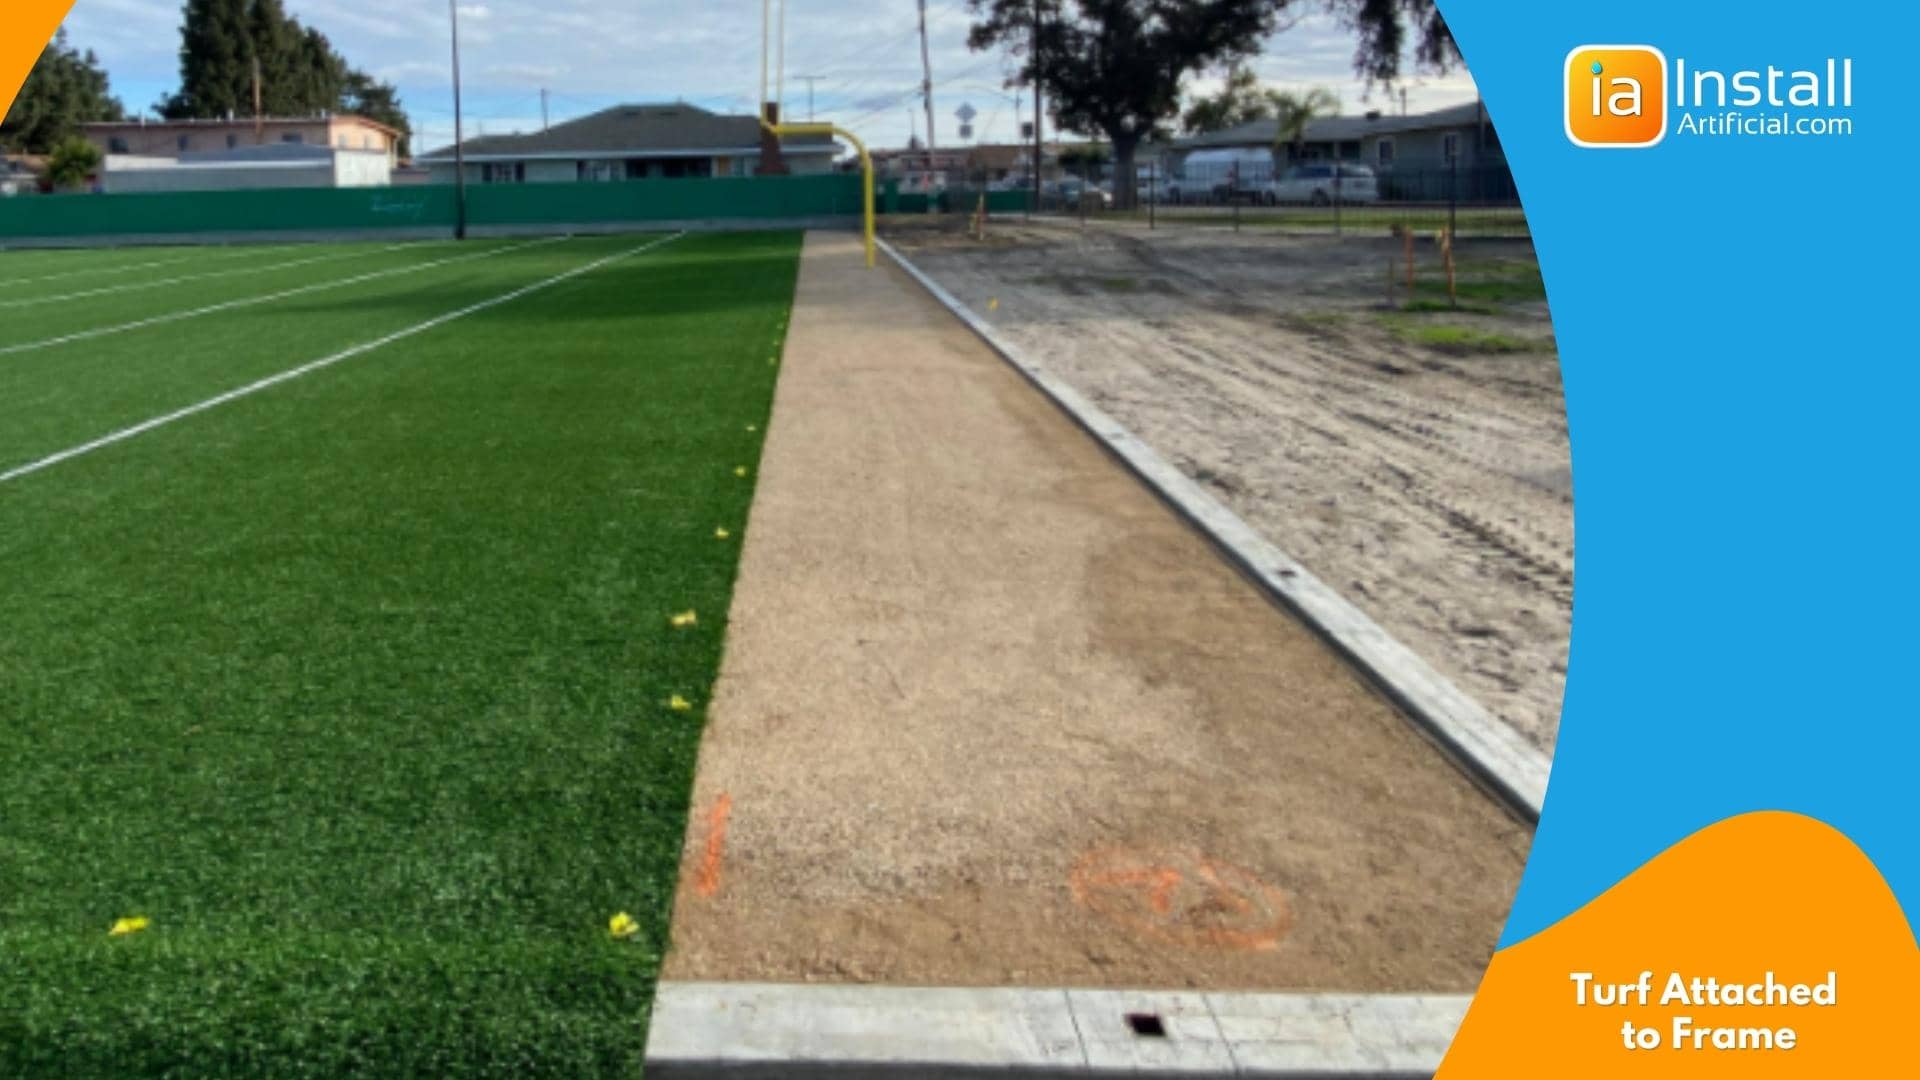 artificial turf attached to a frame for nail-free turf installation